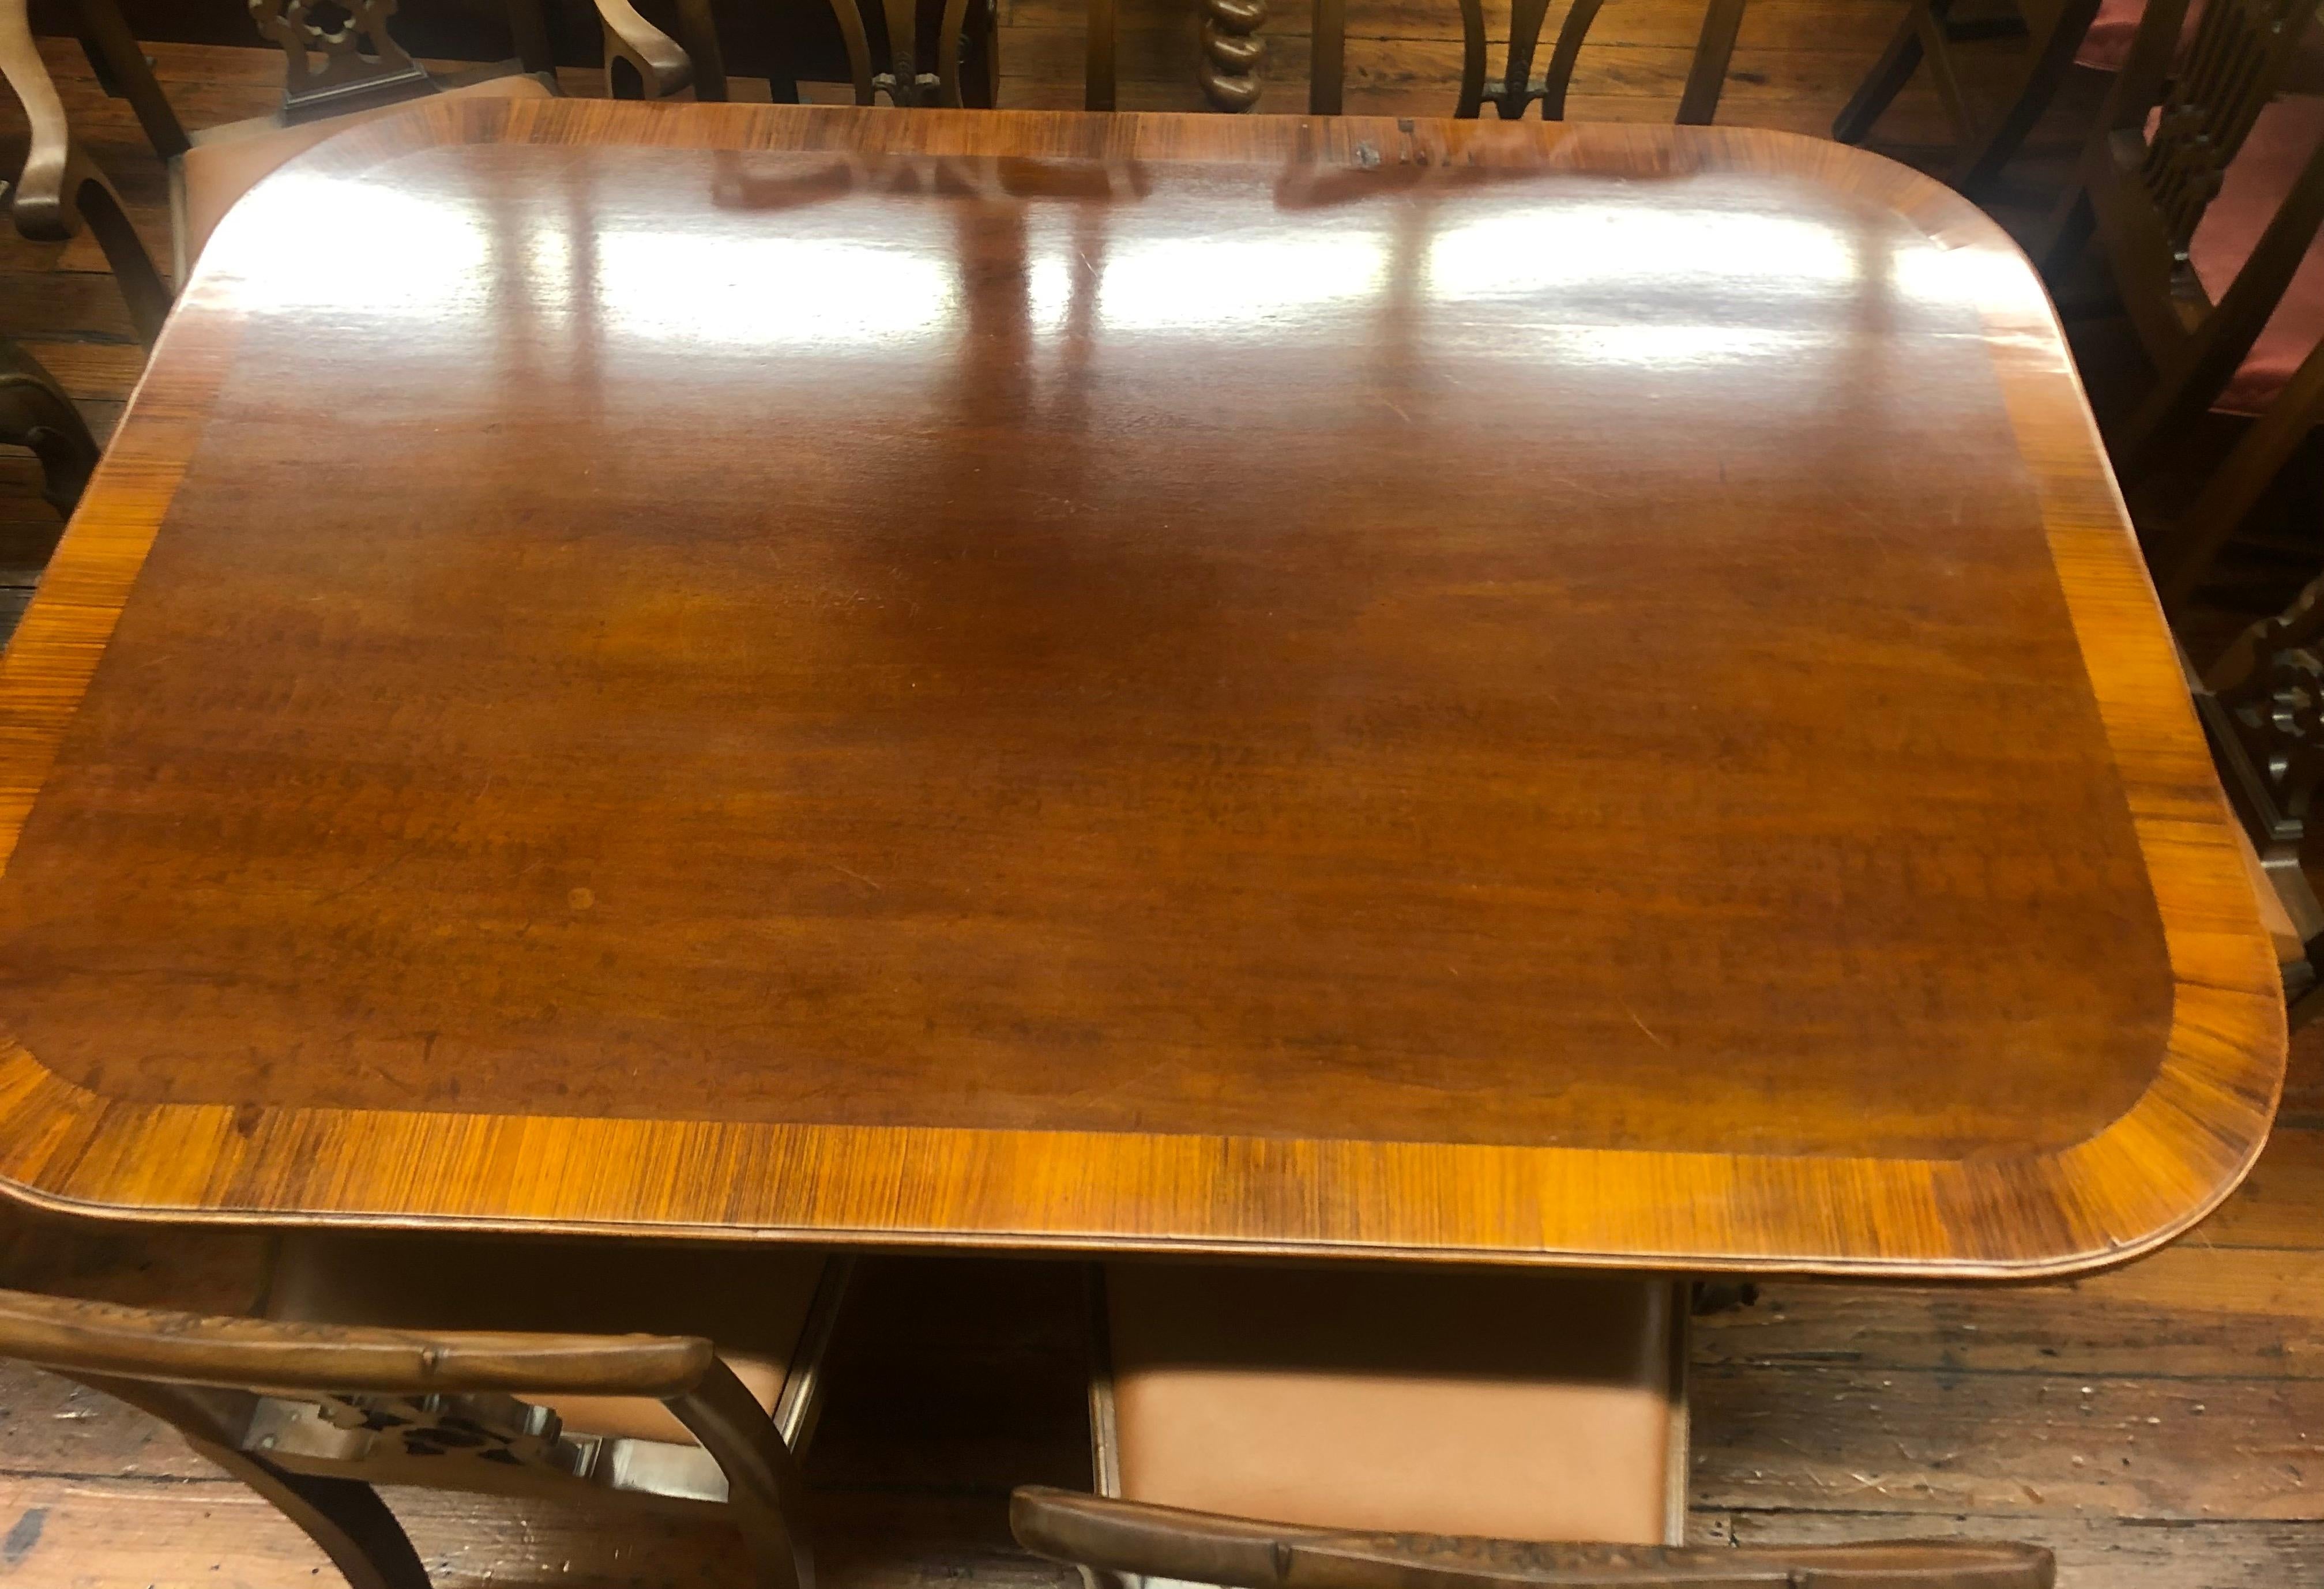 Fine and rare antique English period Geo. III Sheraton style tilt top rectangular dining table, with a wide satinwood inlaid crossband around the perimeter of the table. Quad leg reeded pedestal, tilt-top. Old repair to an area mon the satinwood